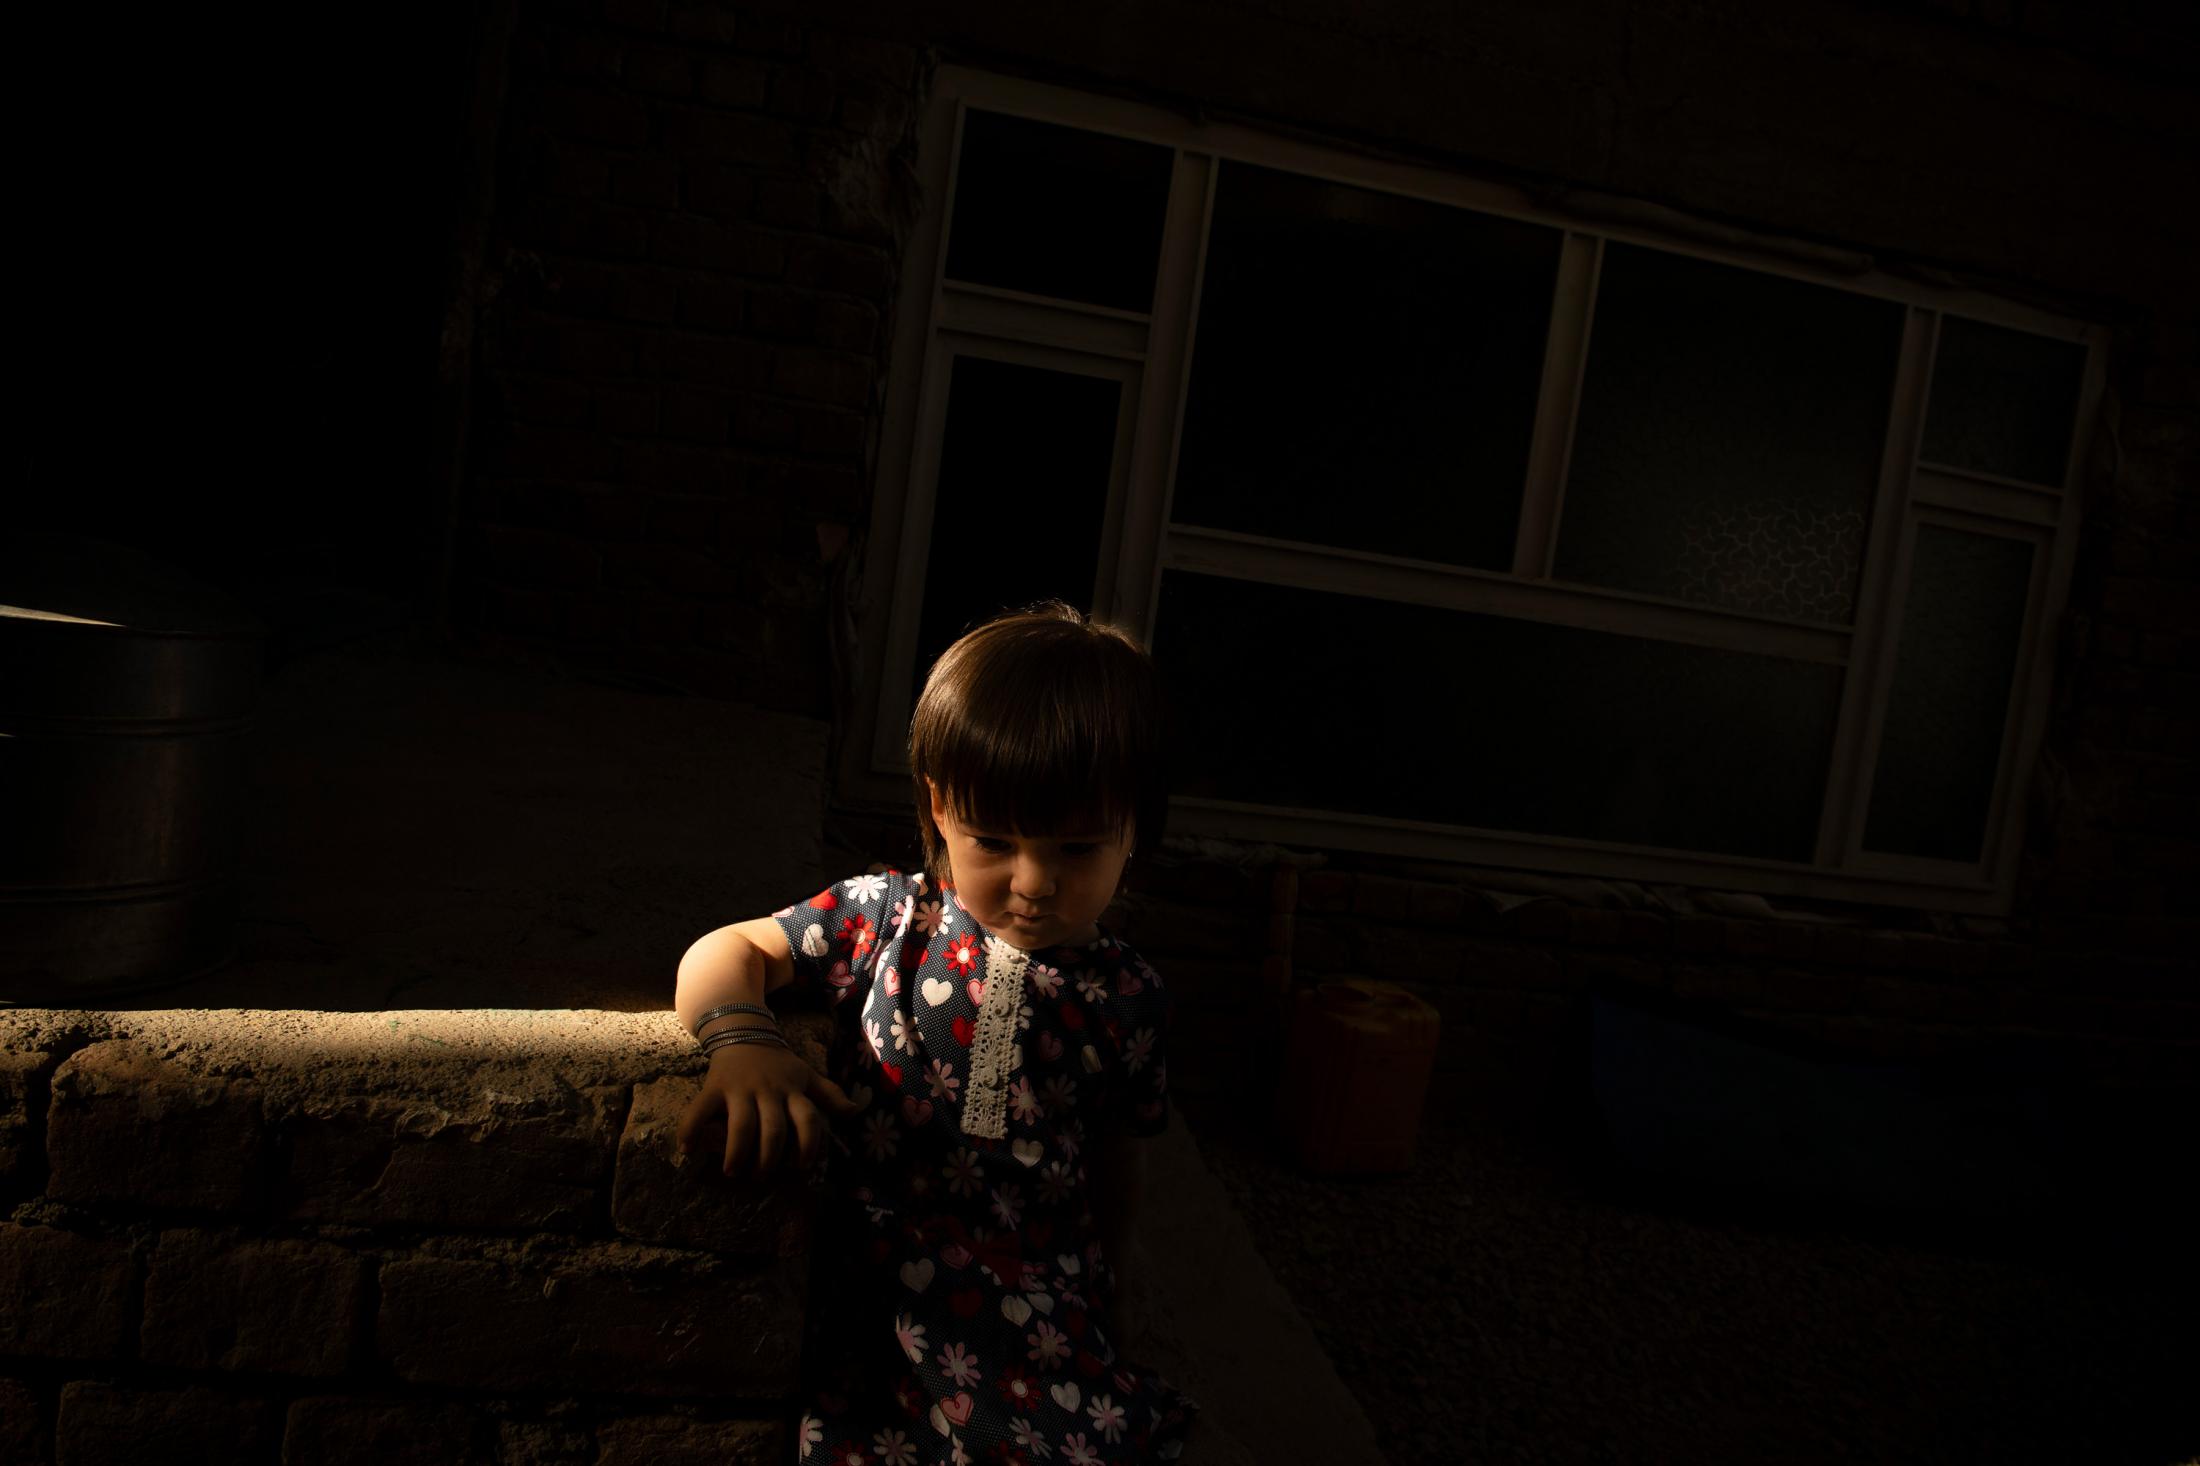 A Generation of Afghan Widows - KABUL | AFGHANISTAN | 8/25/18 | 22 days after the birth...